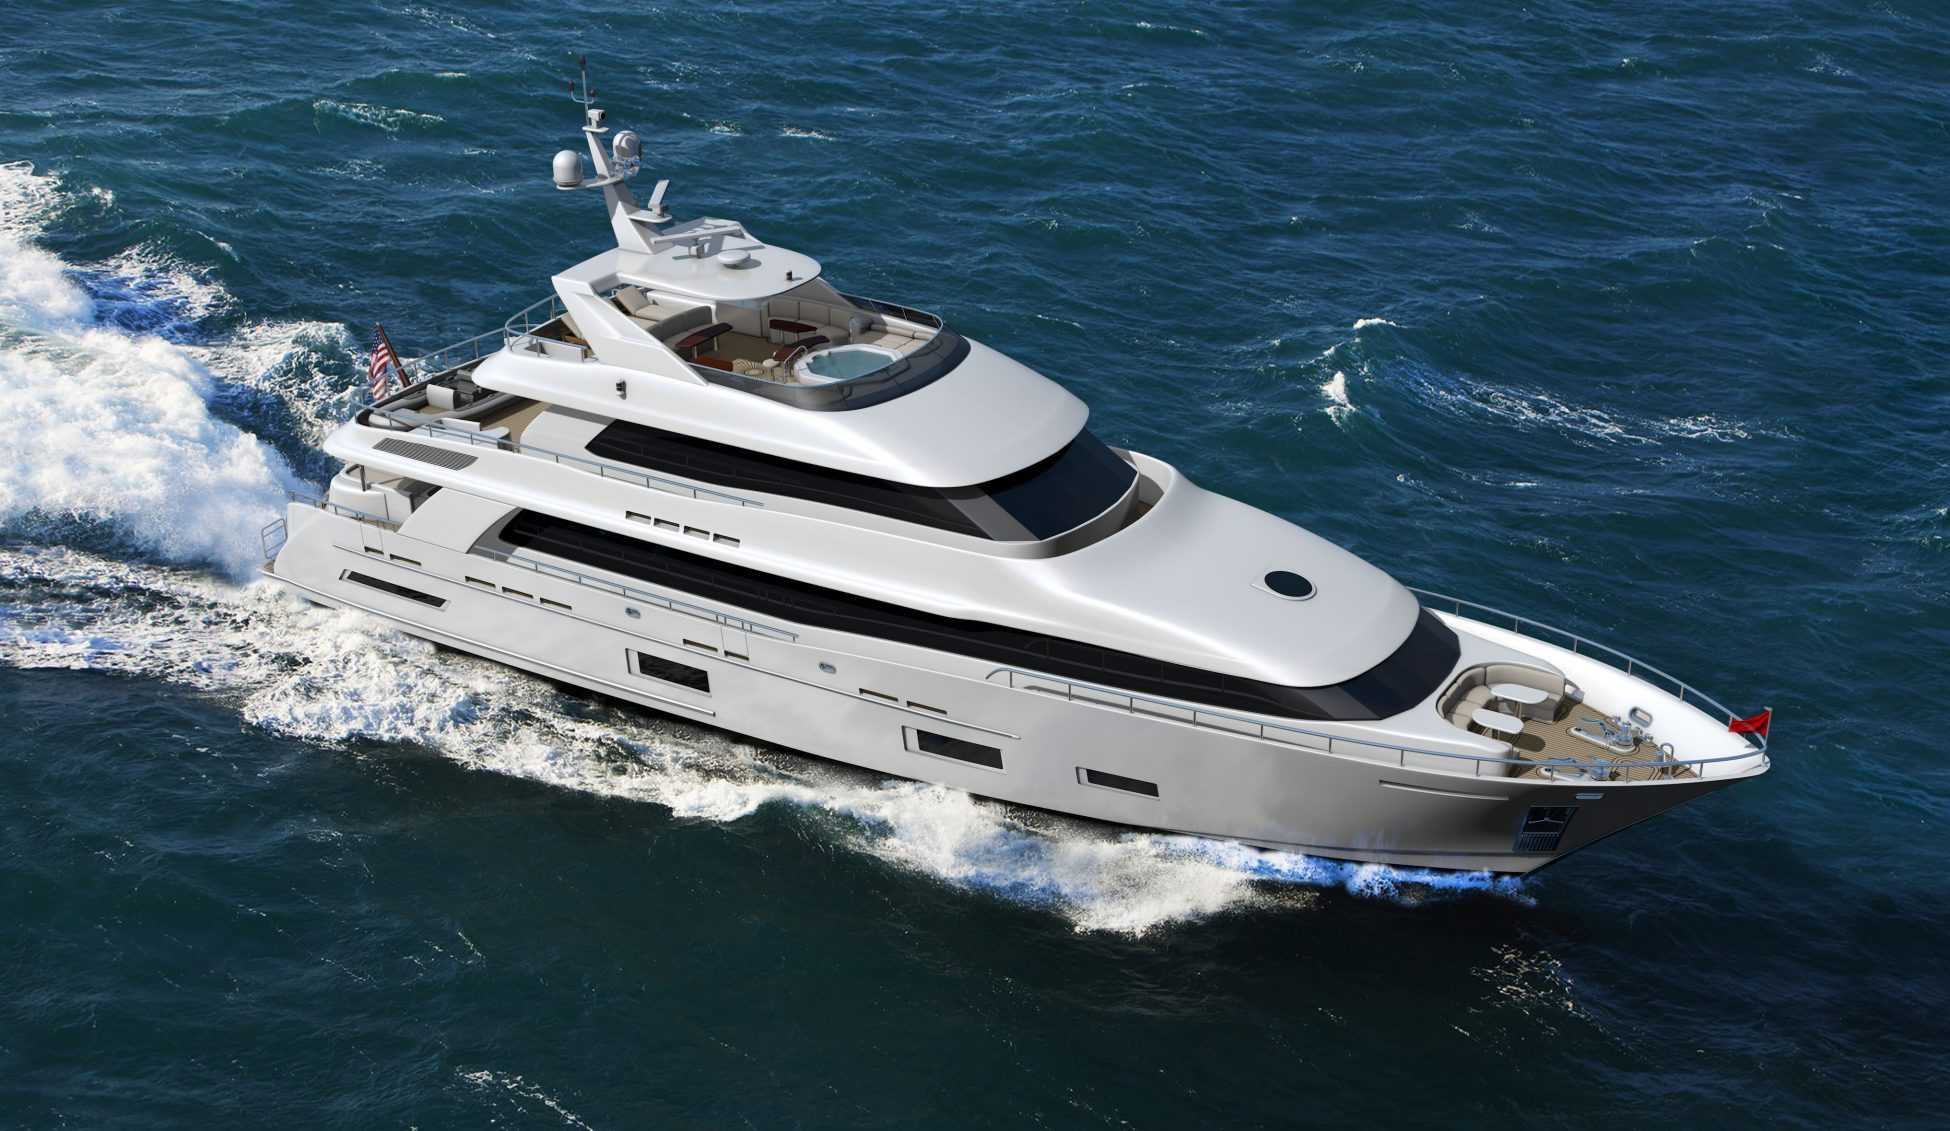 cl 112 bow - Karen Lynn Interiors - Interior Design for Yacht, Aircrafts and Residential Projects